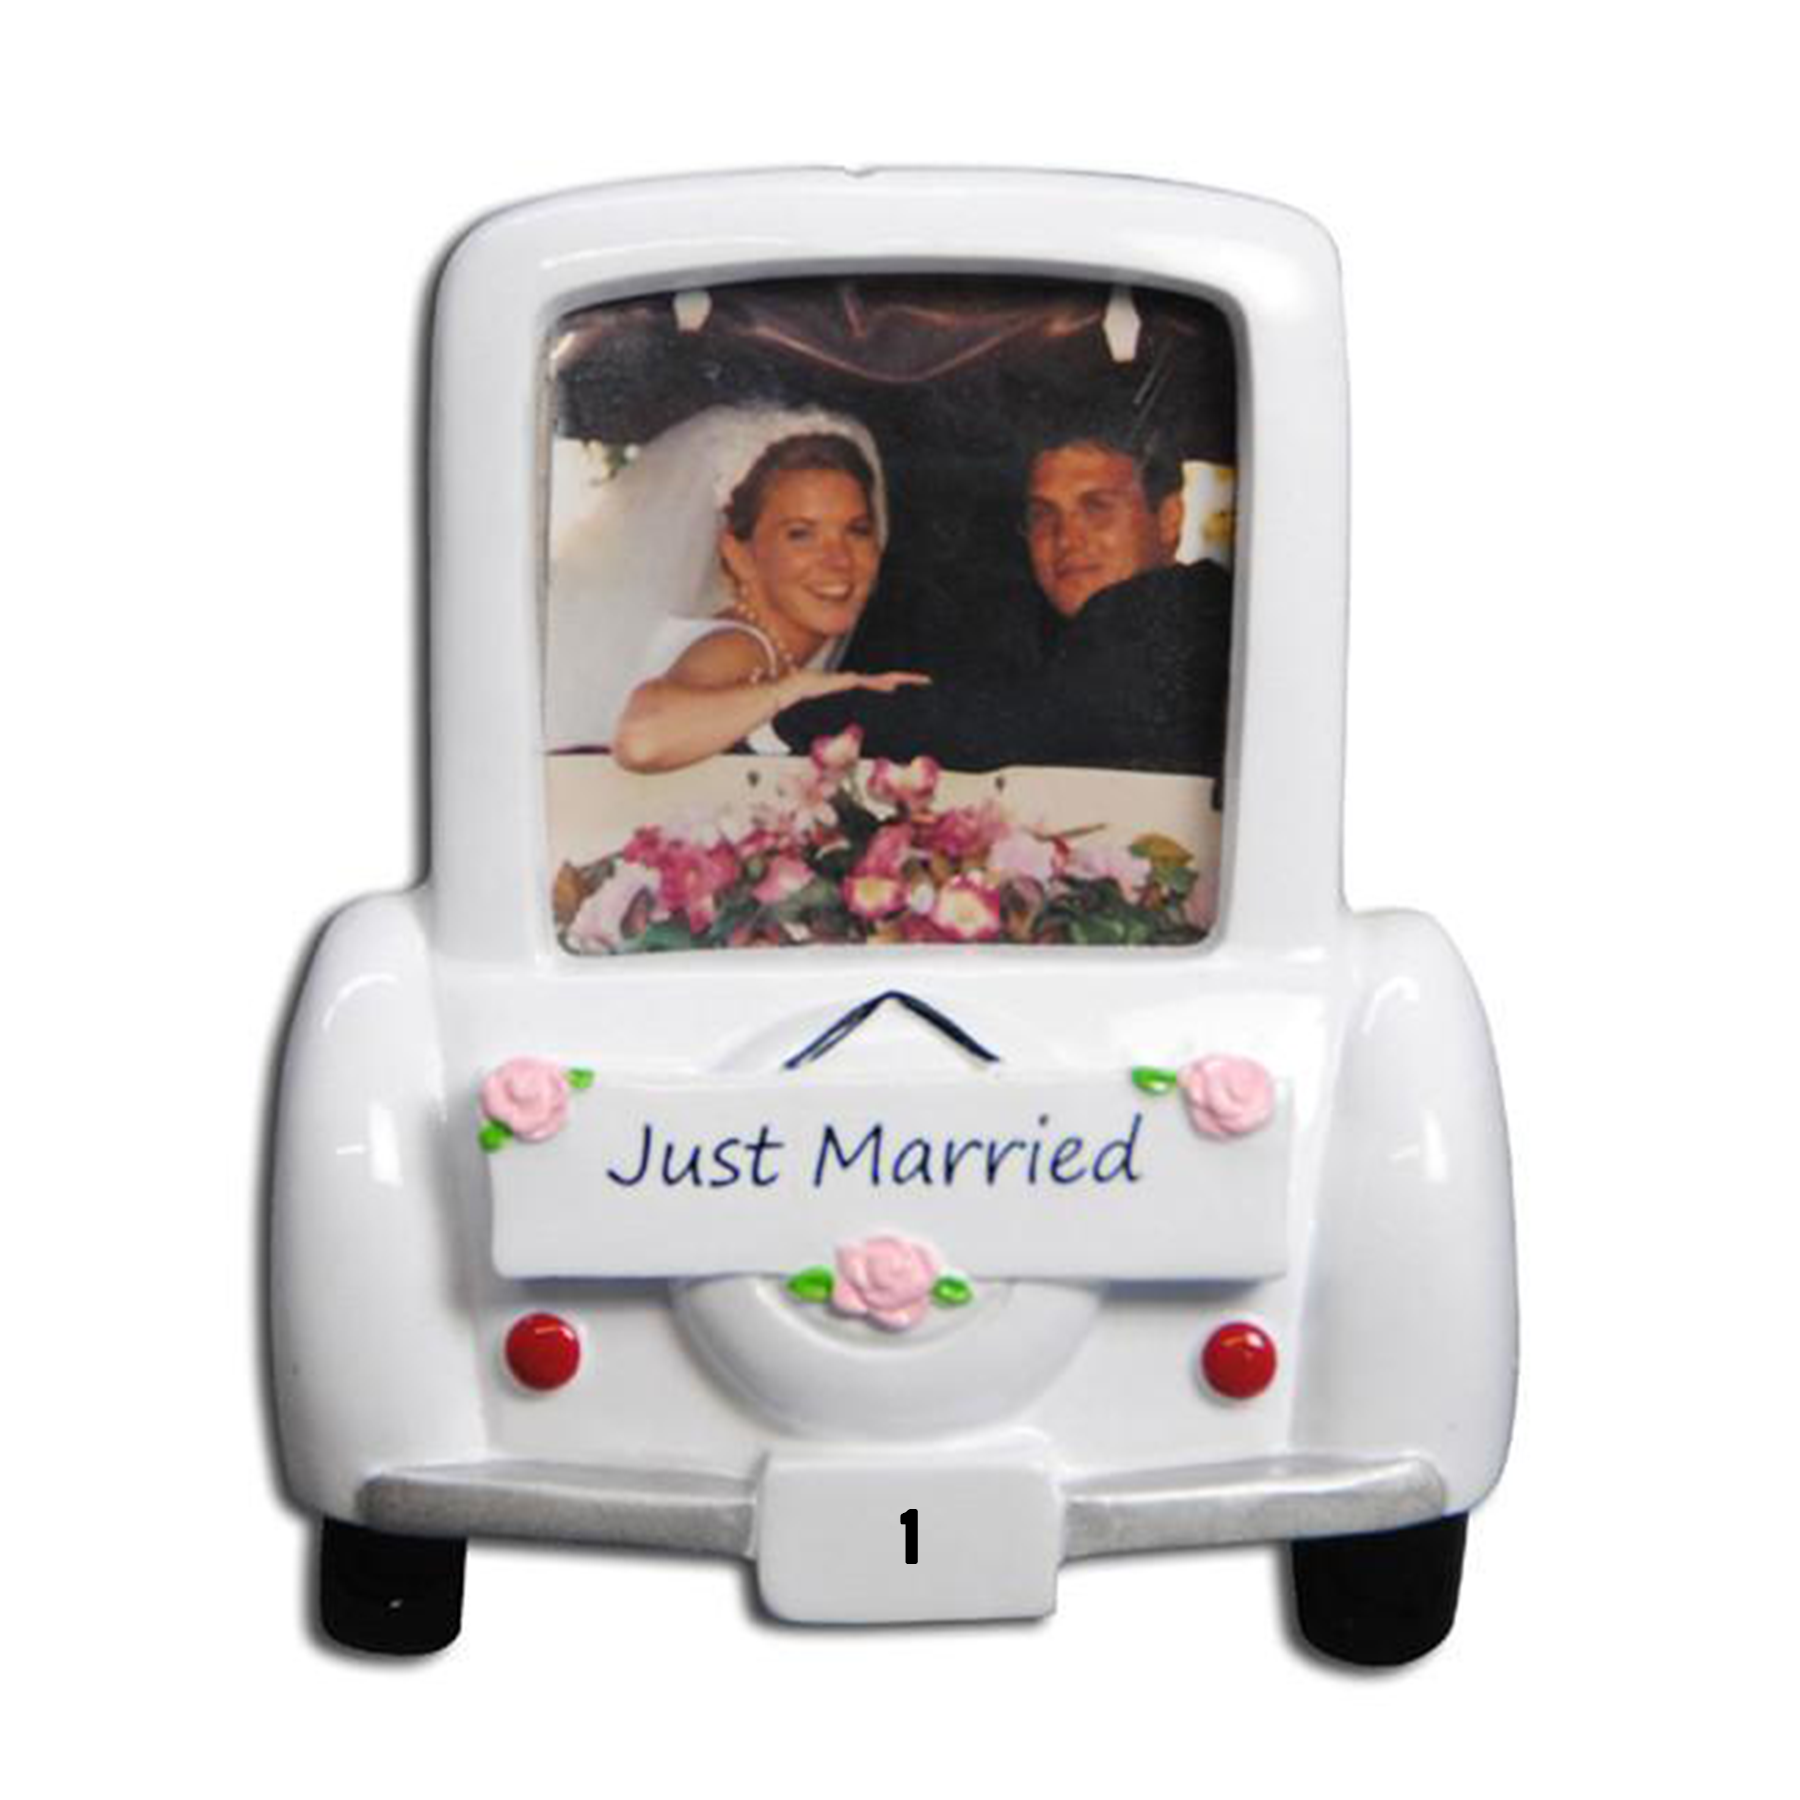 Just Married - Picture Frame Car (7471027126446)